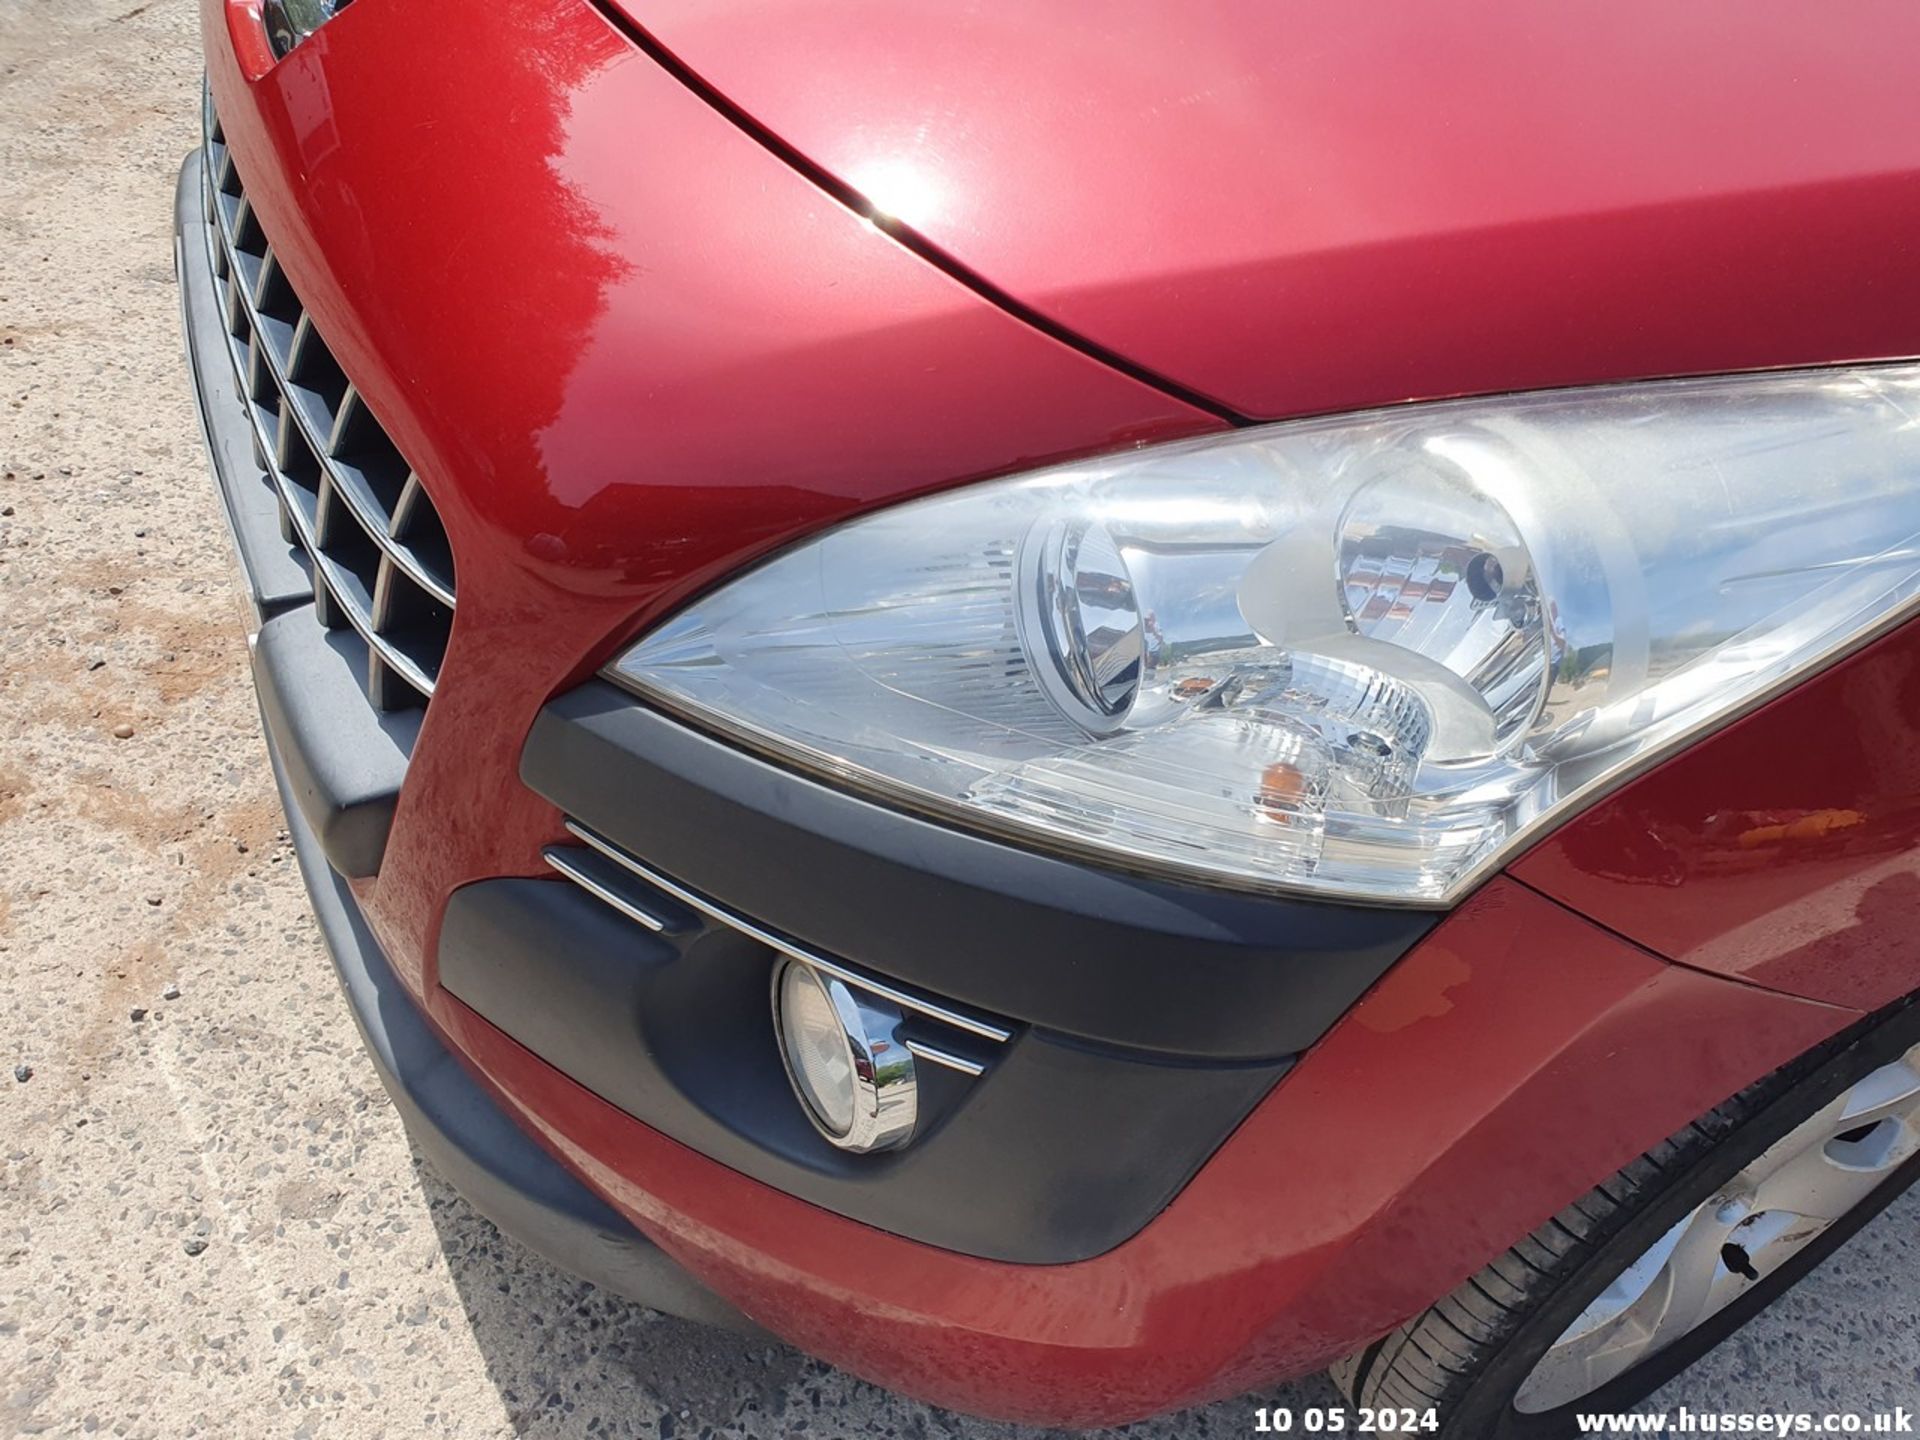 11/61 PEUGEOT 3008 SPORT E-HDI S-A - 1560cc 5dr Hatchback (Red, 89k) - Image 44 of 49